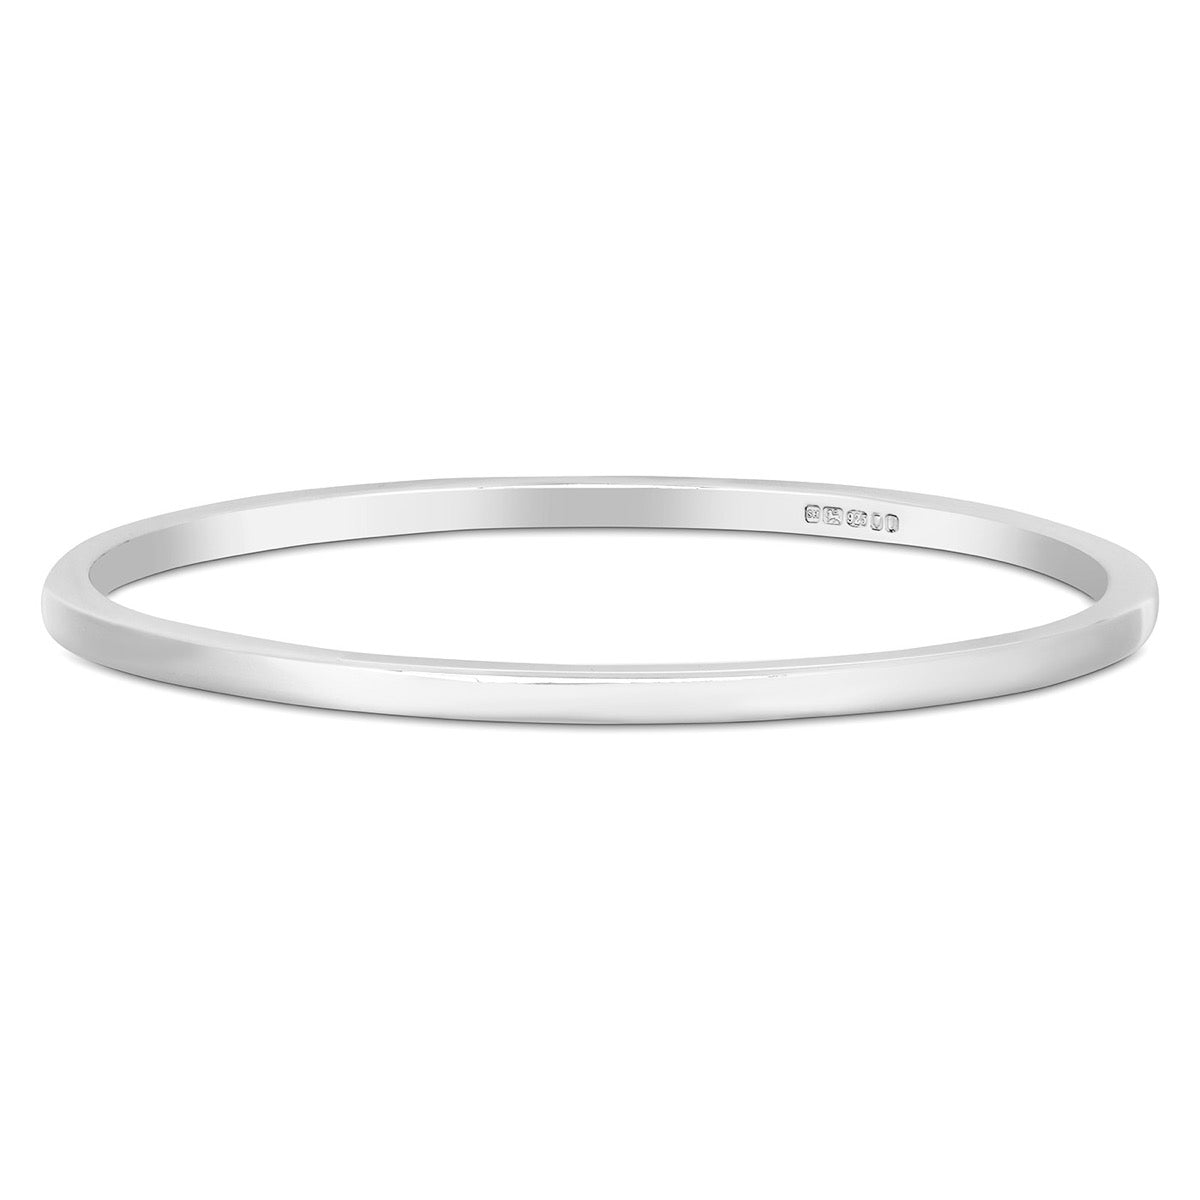 Silver Bangle Square Section